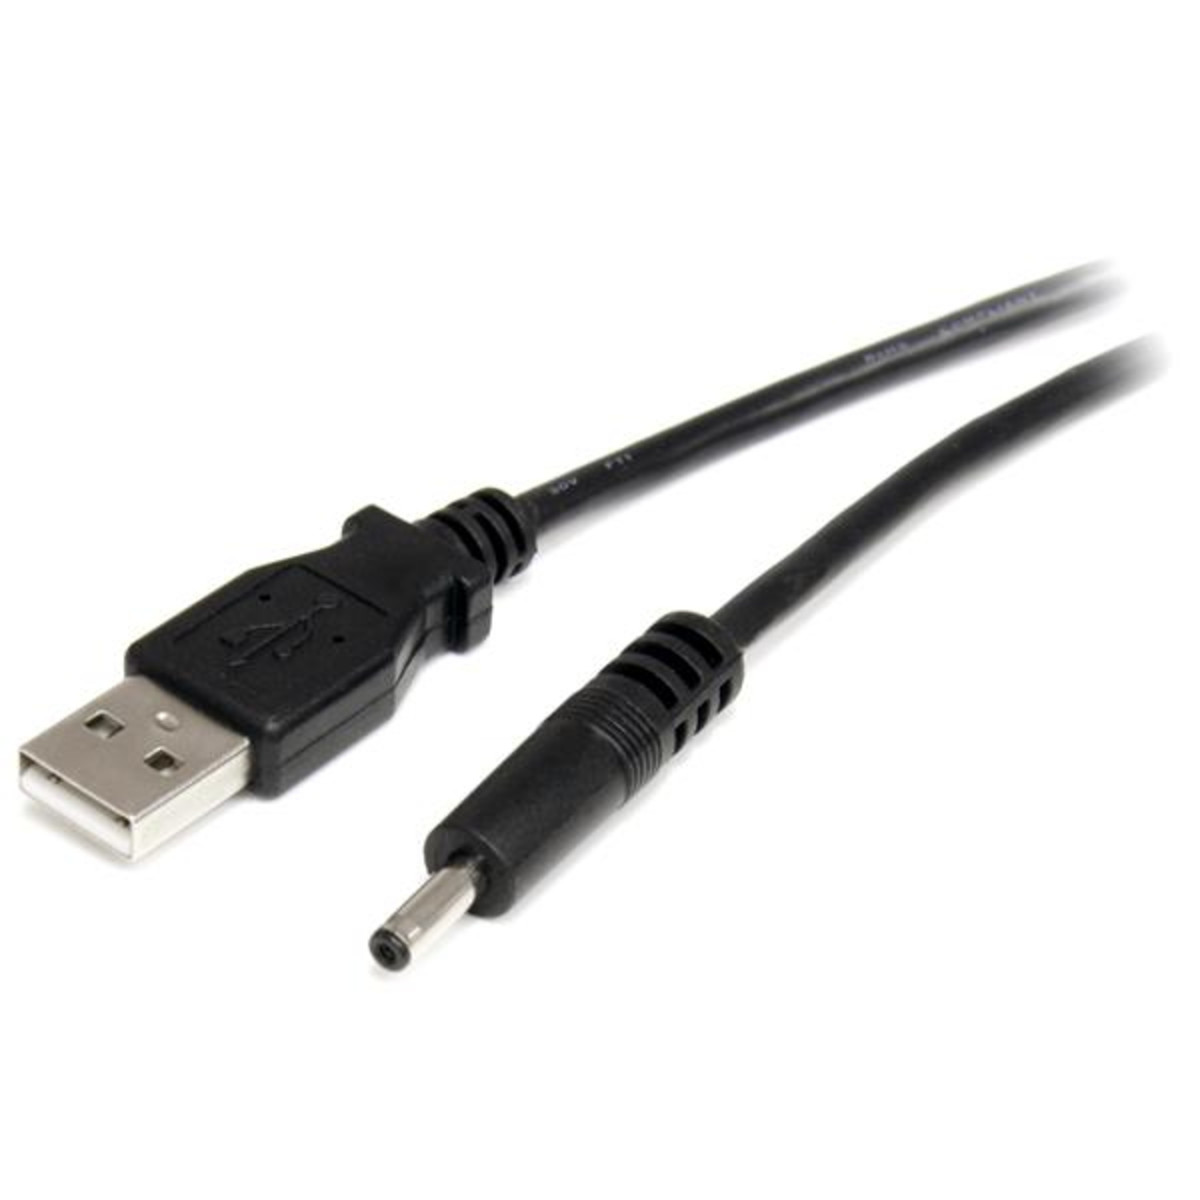 USB to 3.4mm power cable